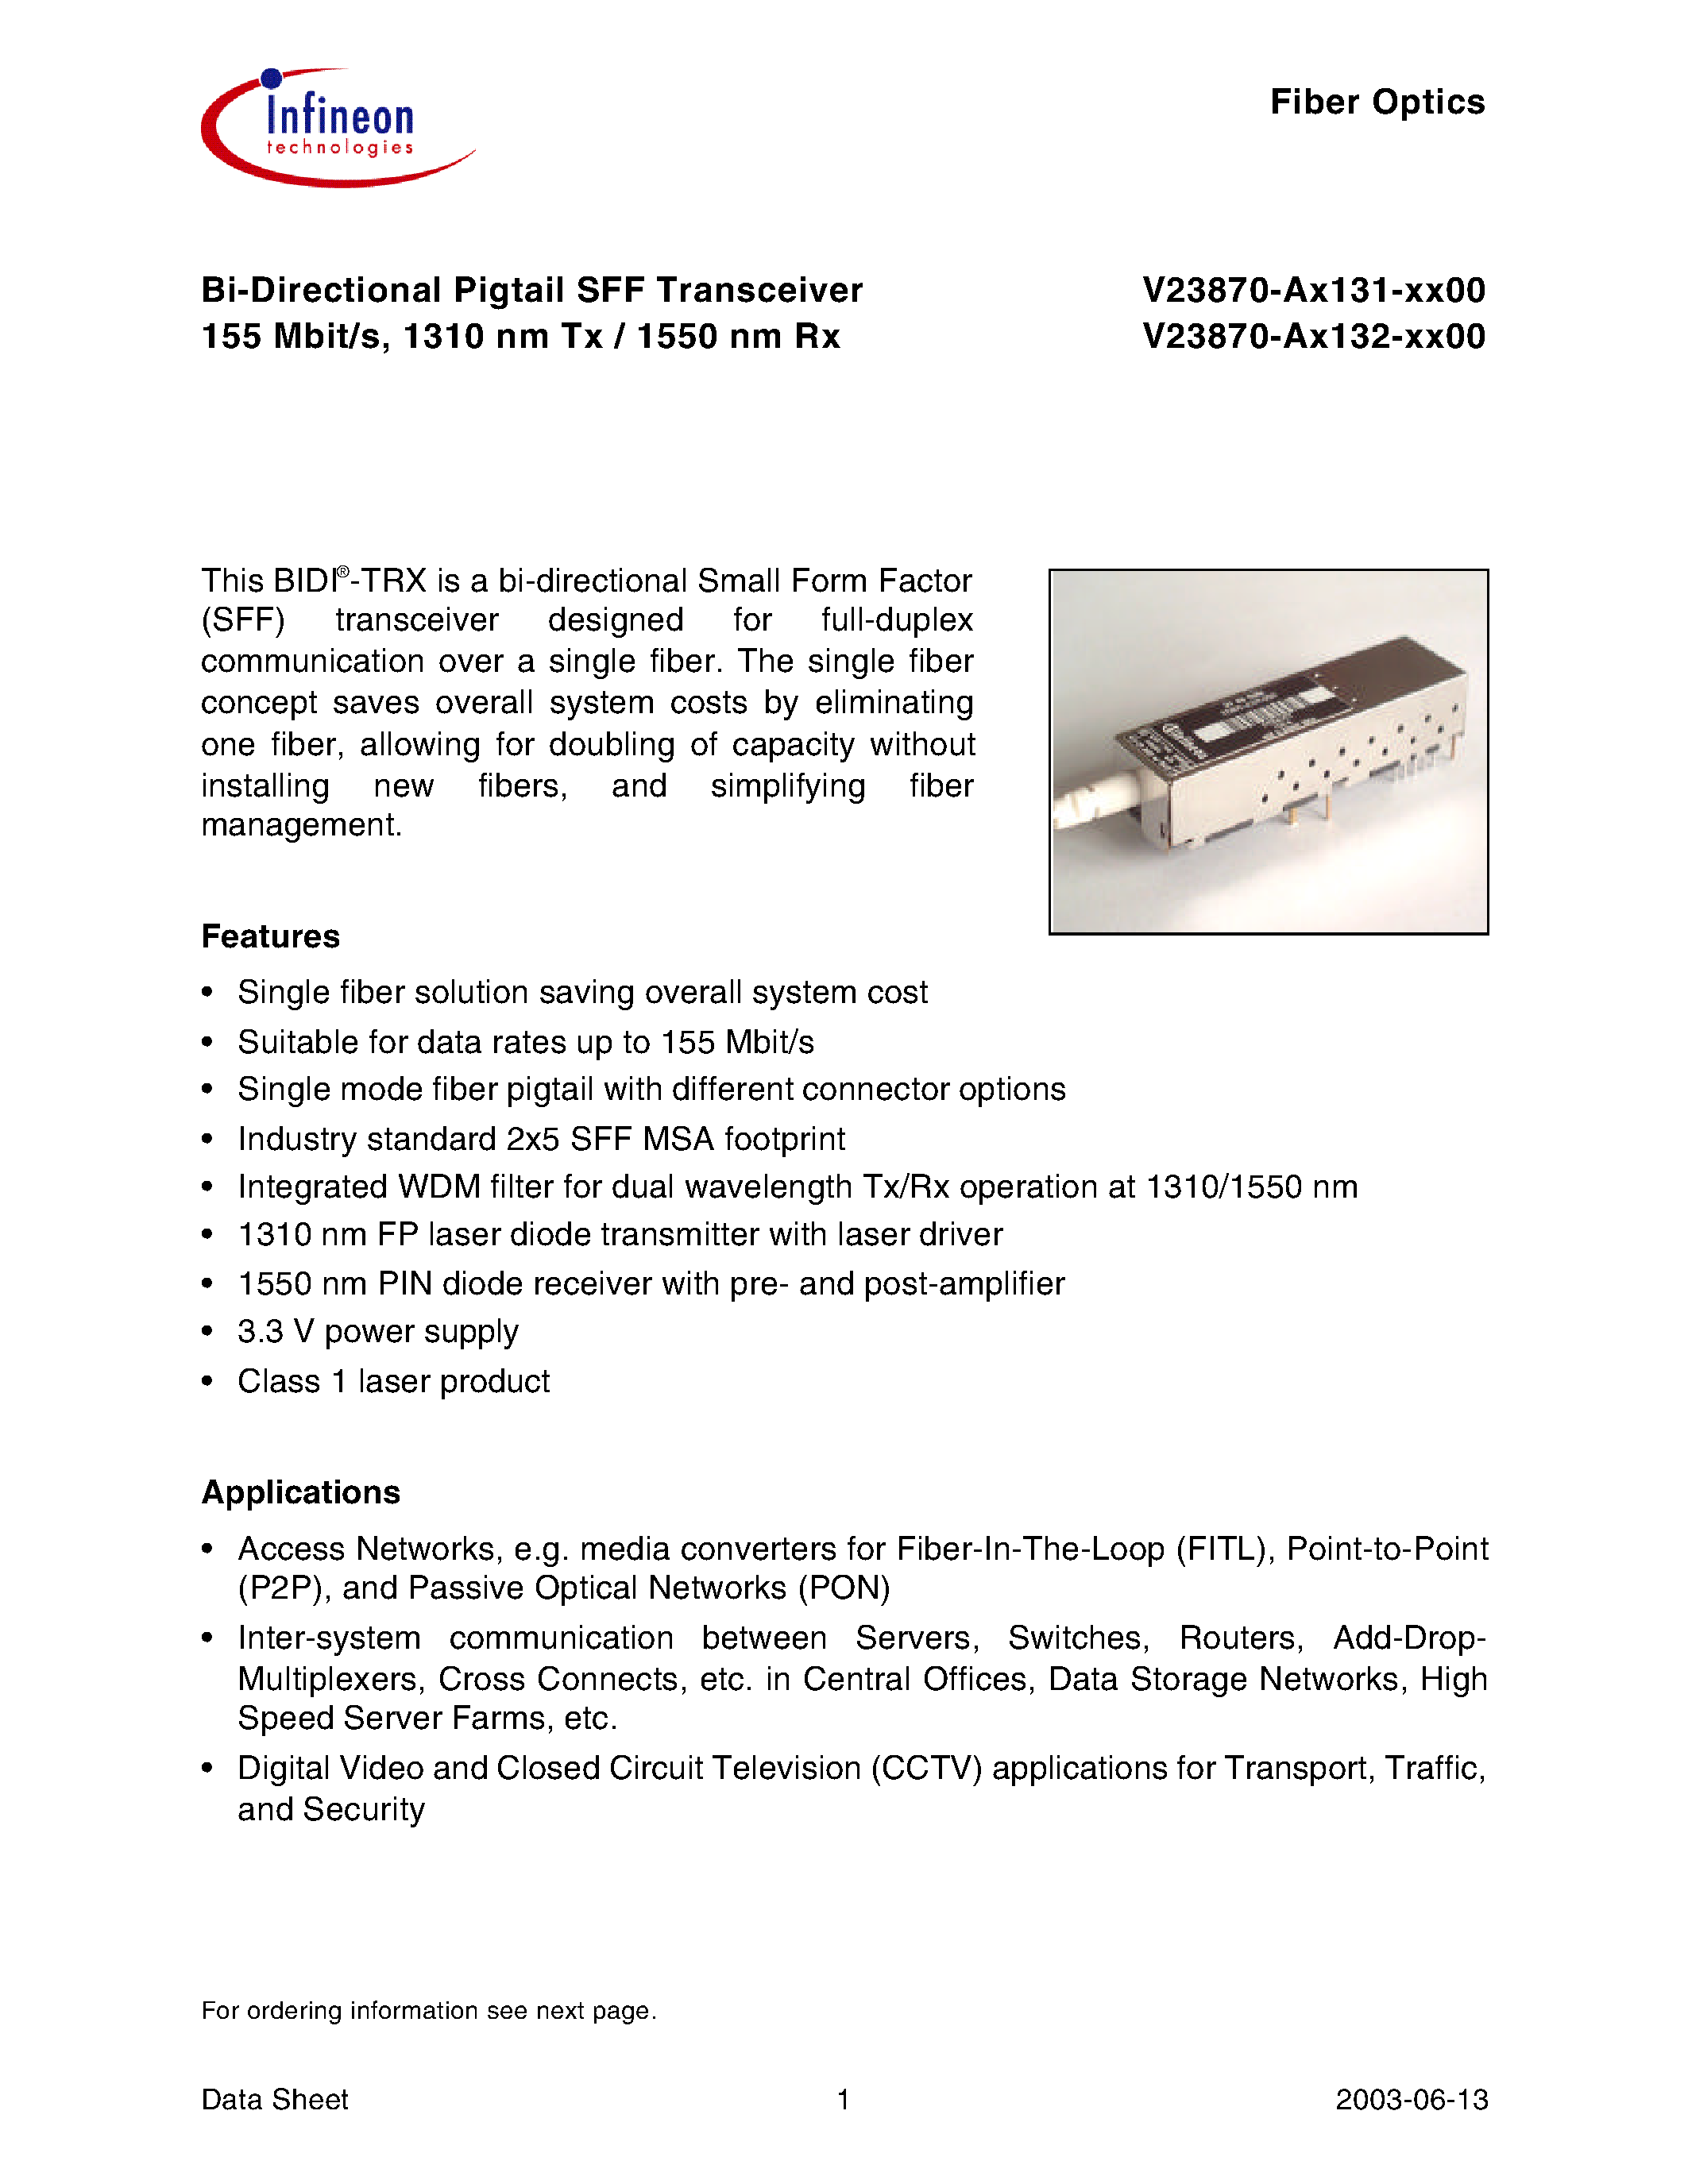 Datasheet V23870-A1132-H100 - Bi-Directional Pigtail SFF Transceiver 155 Mbit/s/ 1310 nm Tx / 1550 nm Rx page 1